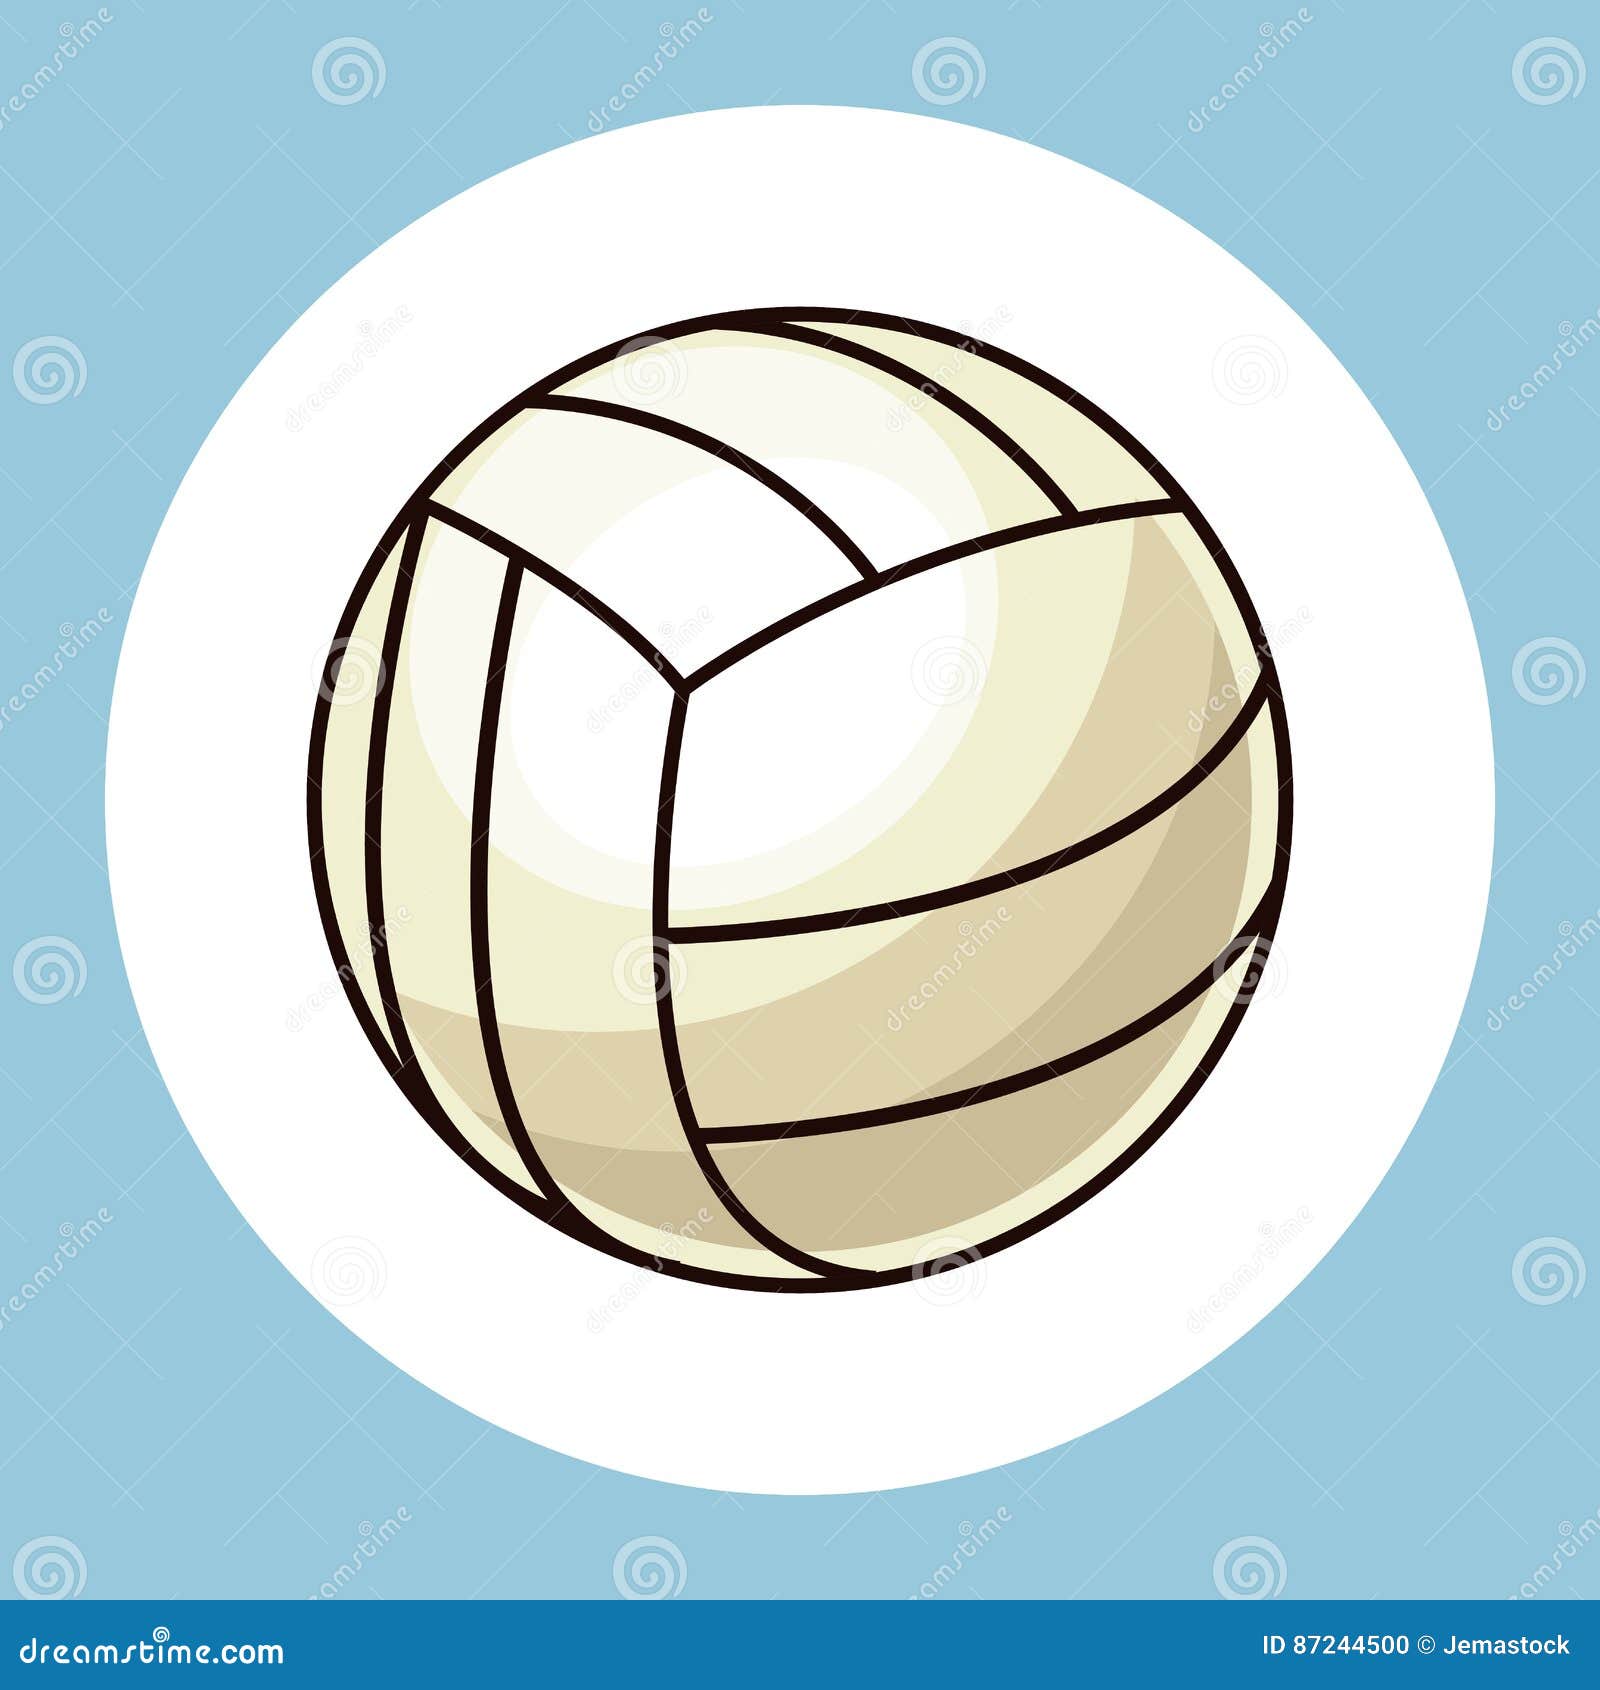 Volleyball Ball Equipment Icon Stock Vector - Illustration of volley ...